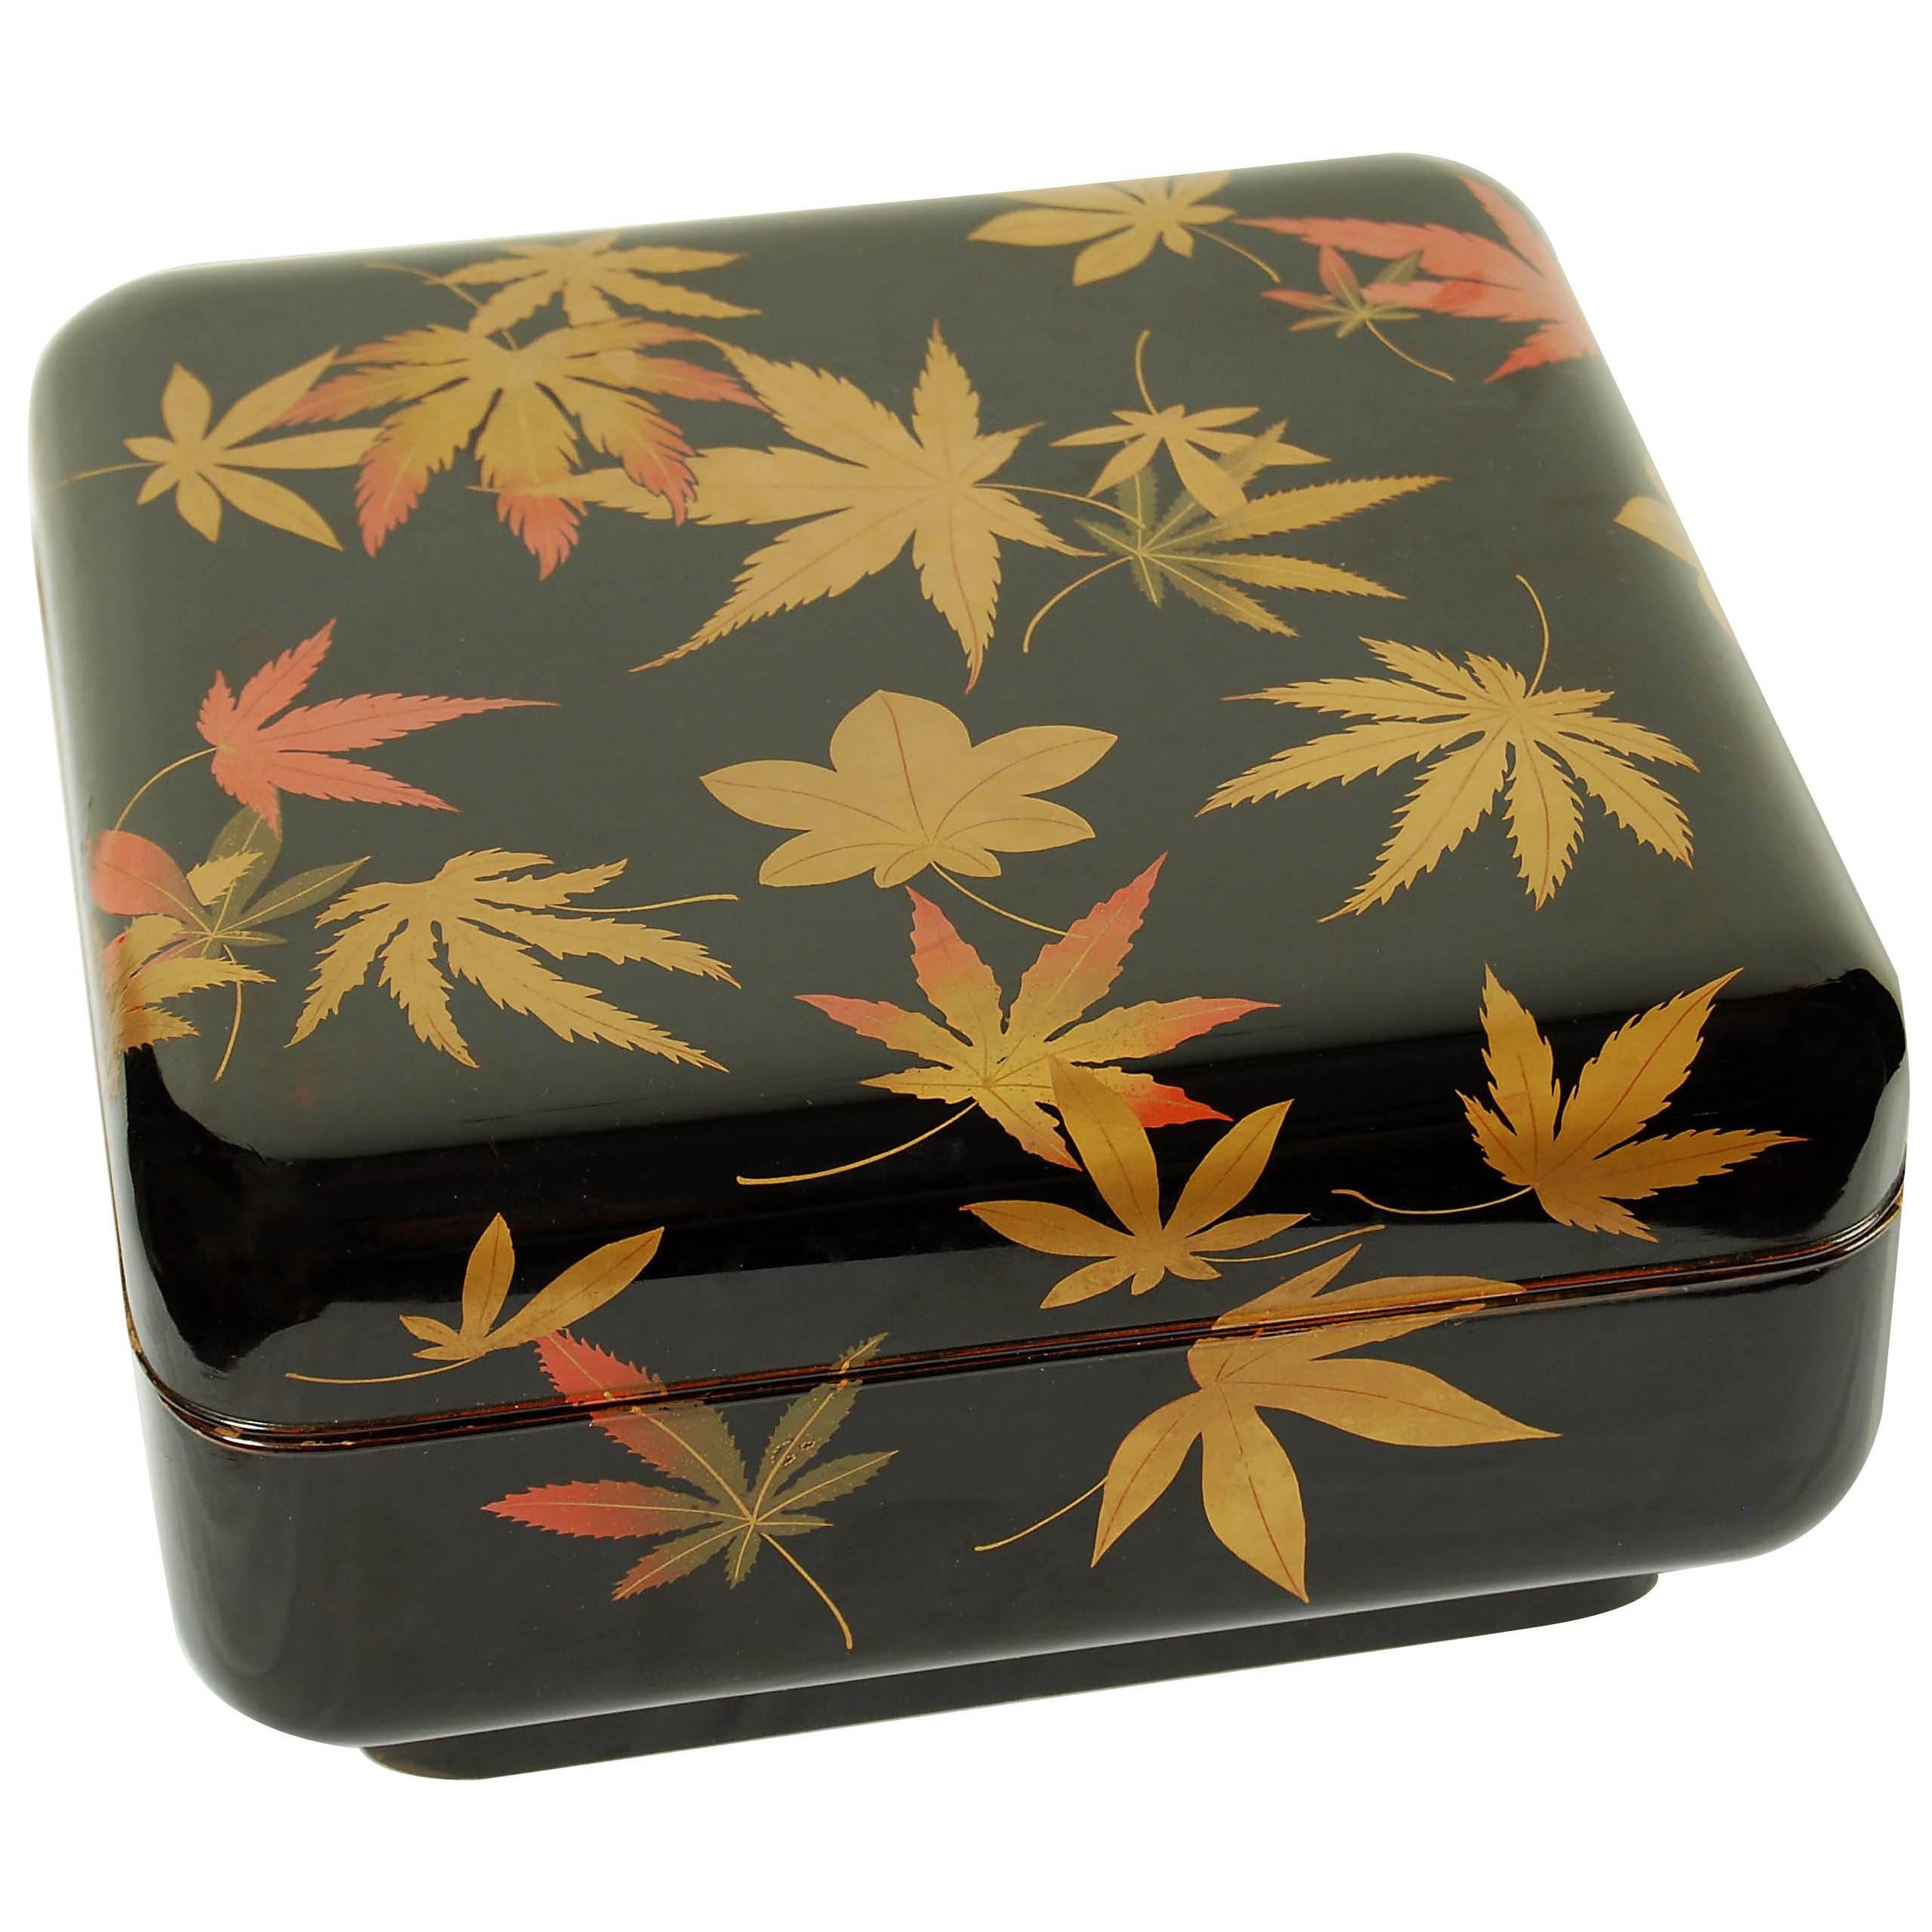 Japanese Lacquer Box with Maple Leaf Design, circa 20th Century